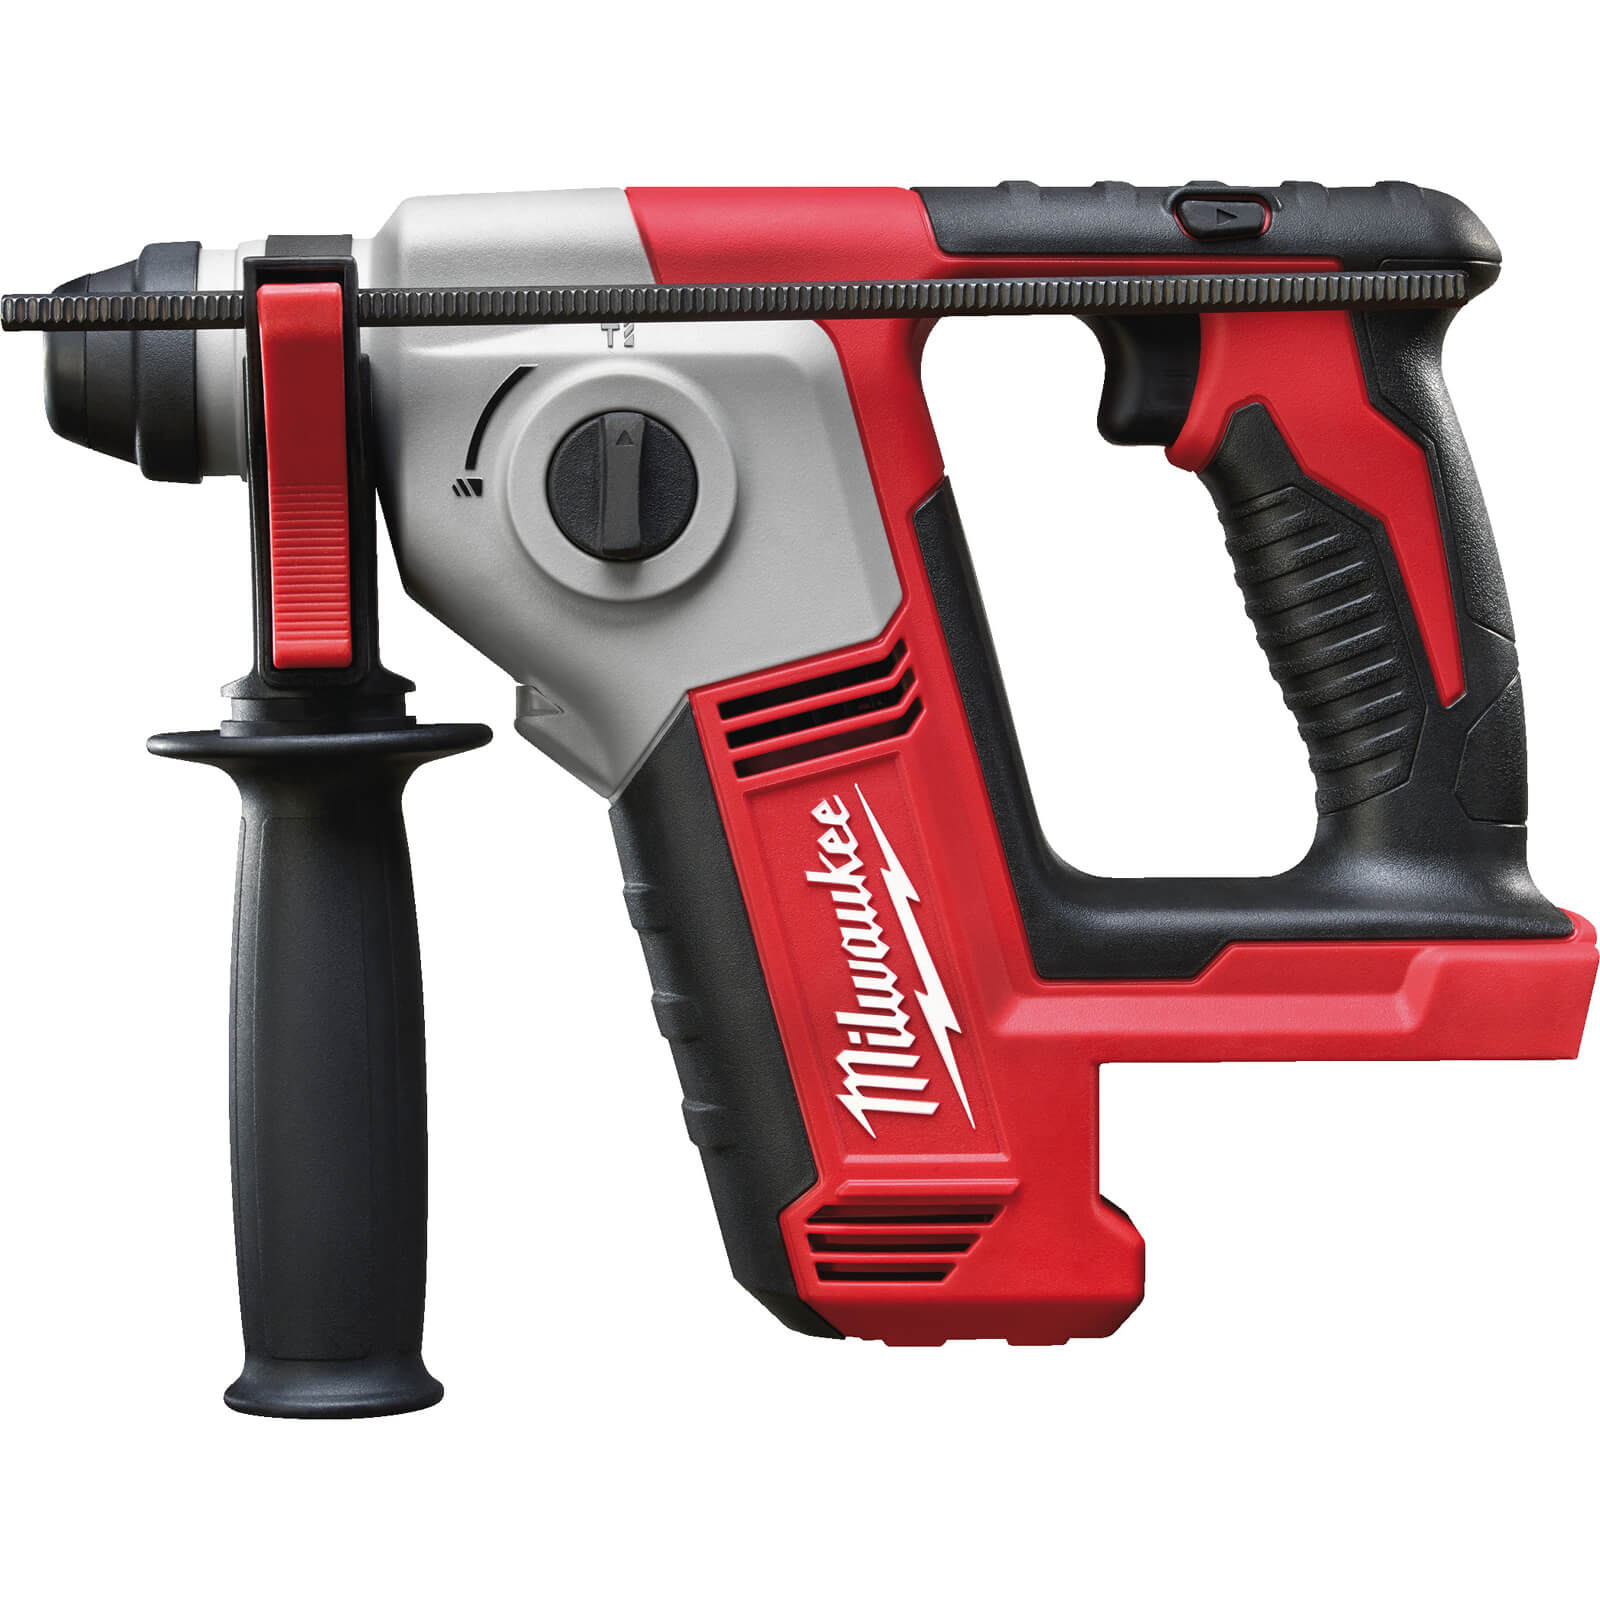 Image of Milwaukee M18 BH 18v Cordless Compact SDS Plus Hammer Drill No Batteries No Charger No Case